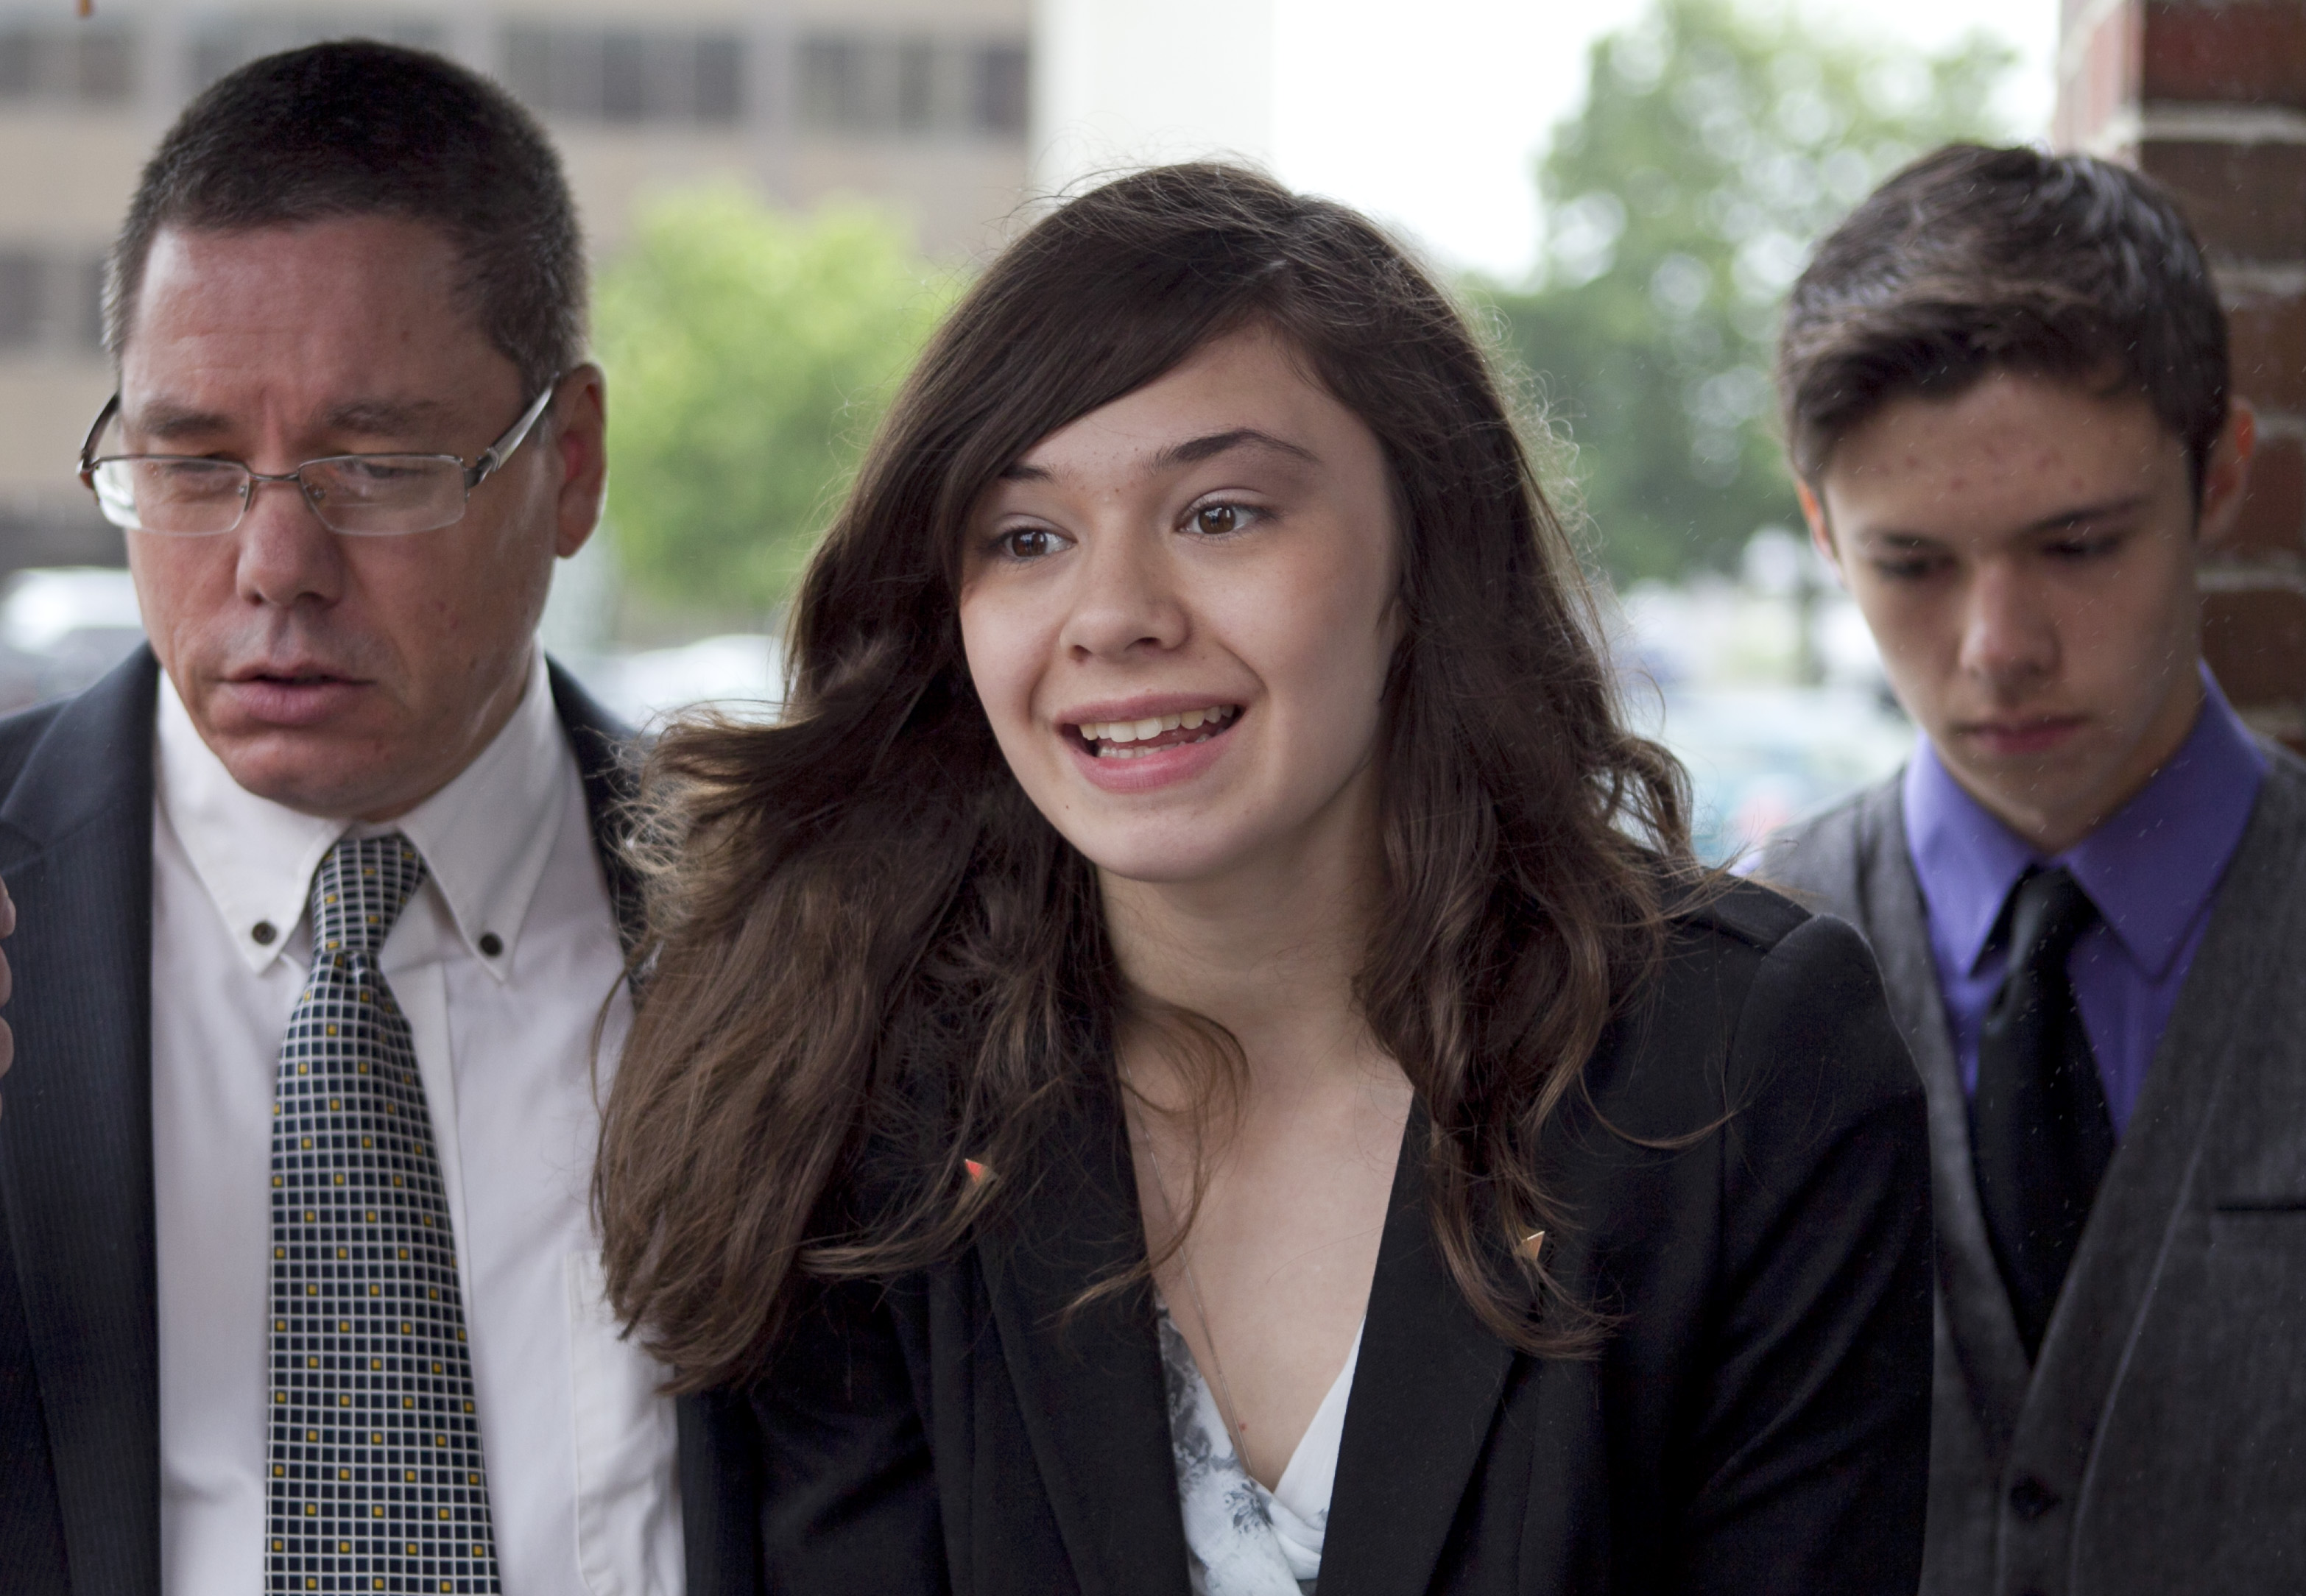 Transgender student Nicole Maines, center, speaks to reporters as her father Wayne Maines, left, and brother Jonas, look on outside the Penobscot Judicial Center in Bangor, Maine, on June 12, 2013. (Robert F. Bukaty—AP)